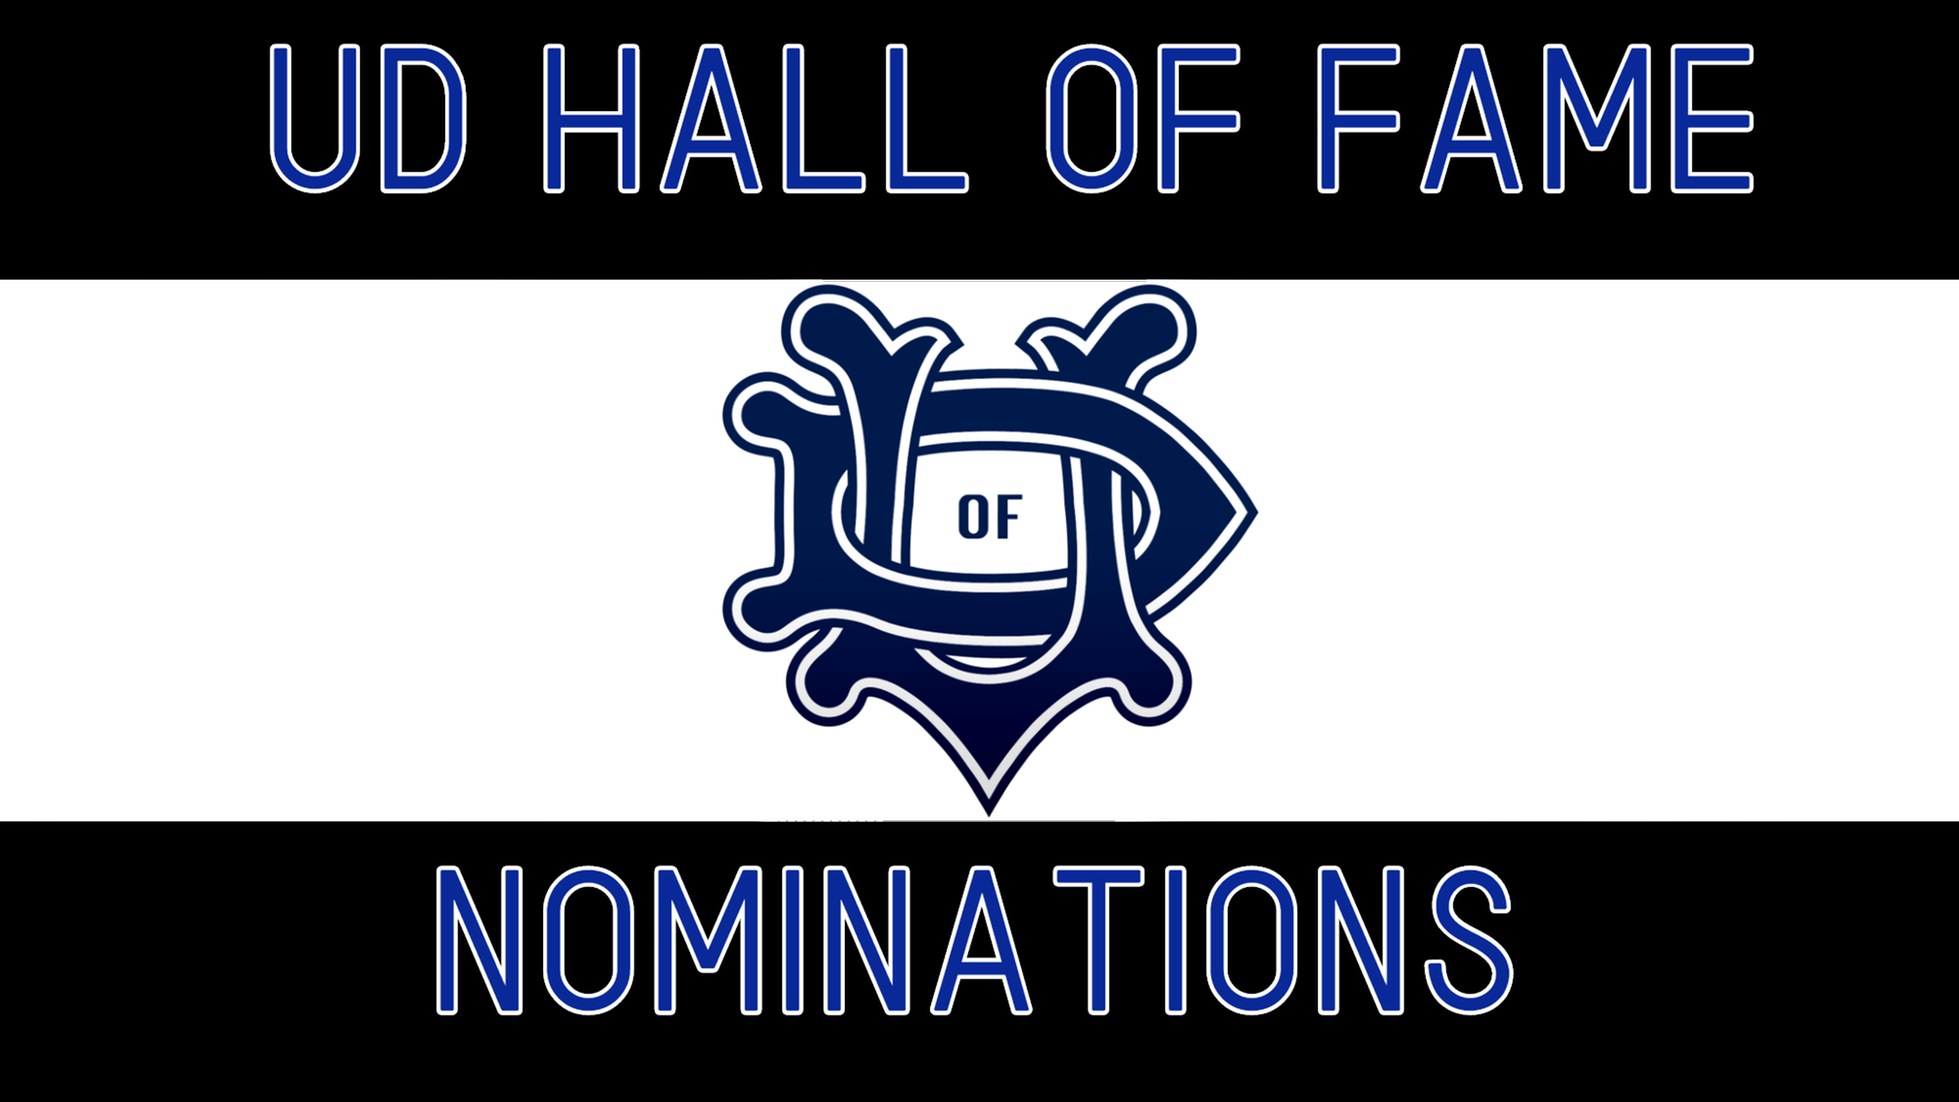 UD is Accepting Nominations for 2021 Hall of Fame Until May 10